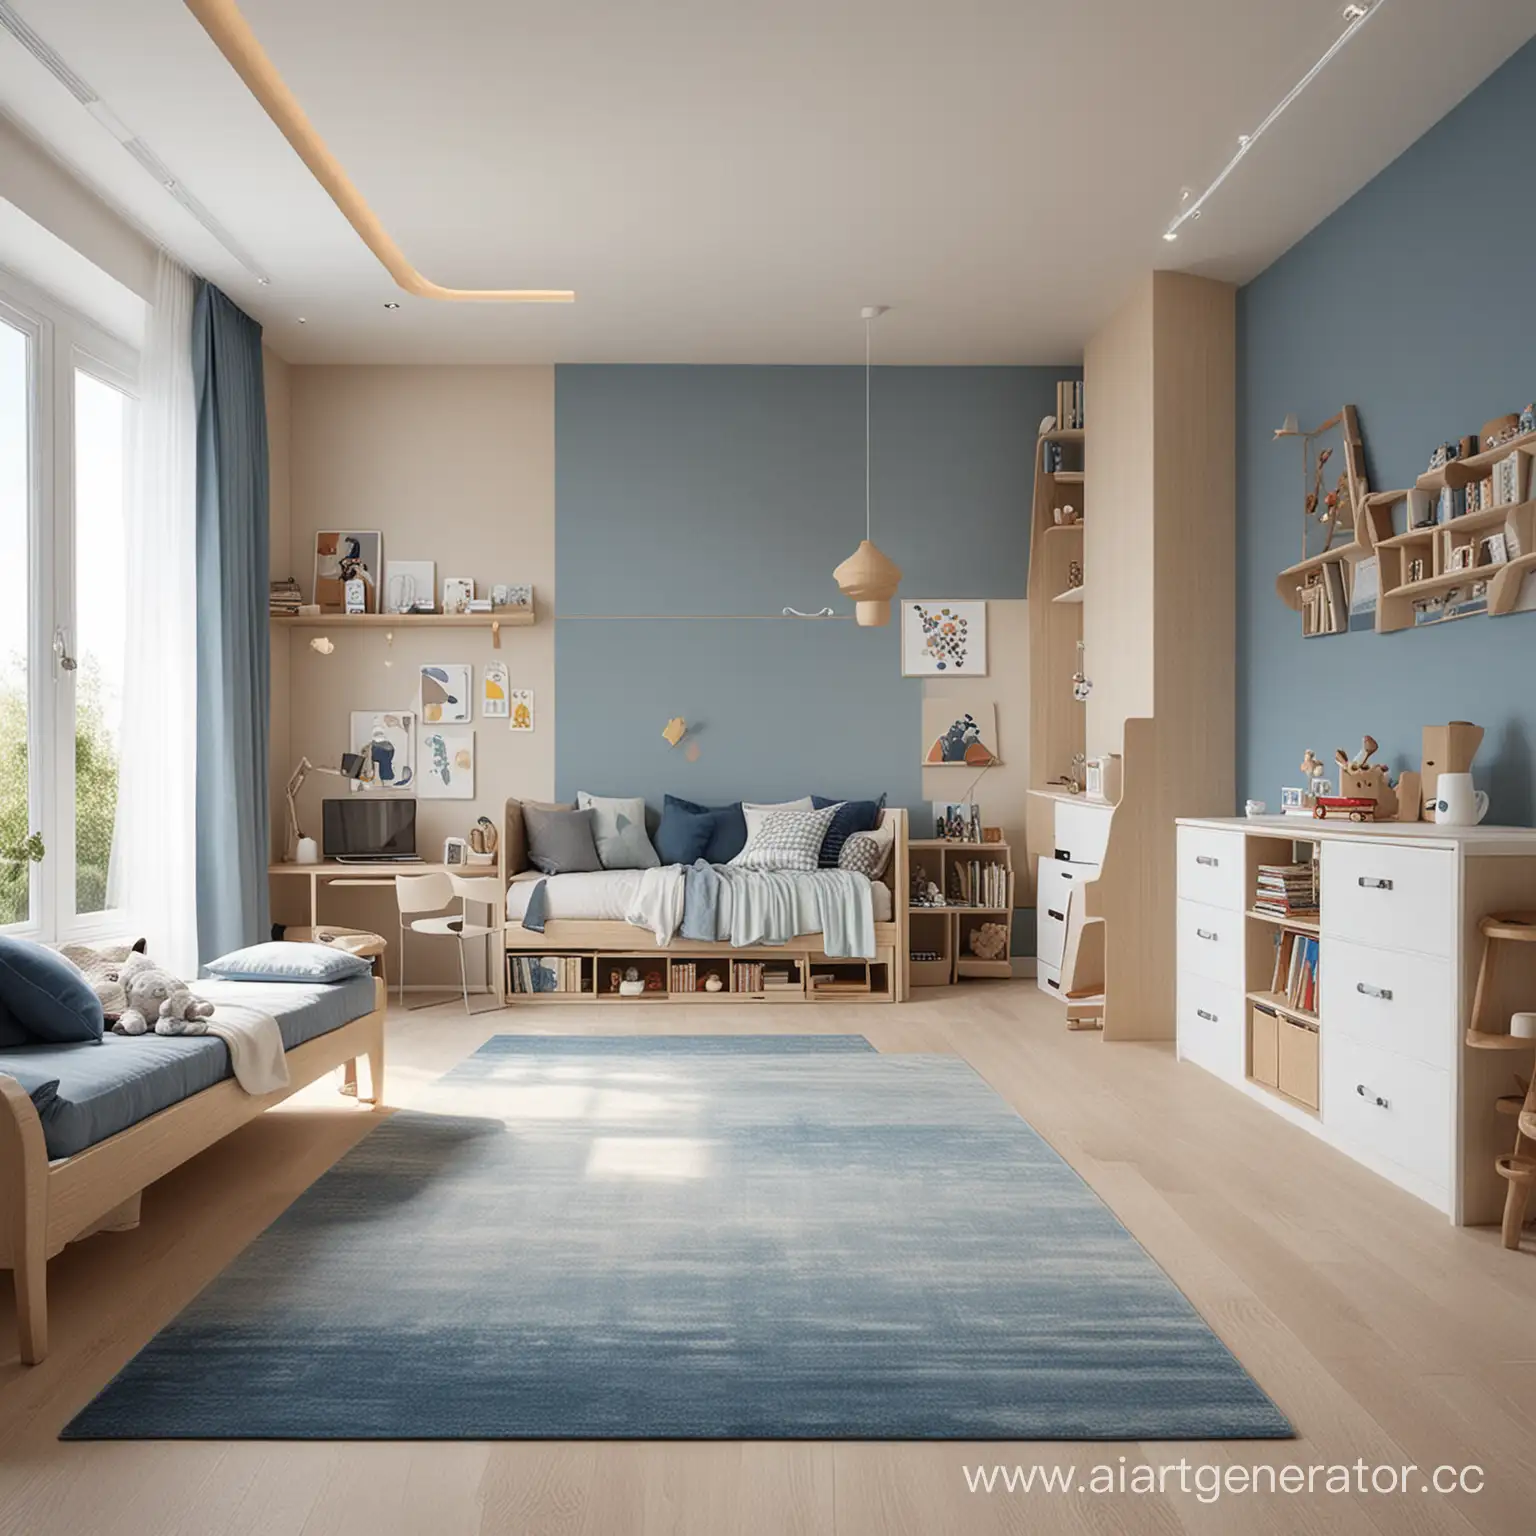 Cozy-Childrens-Room-with-Beige-and-Blue-Accents-and-Space-for-Carpet